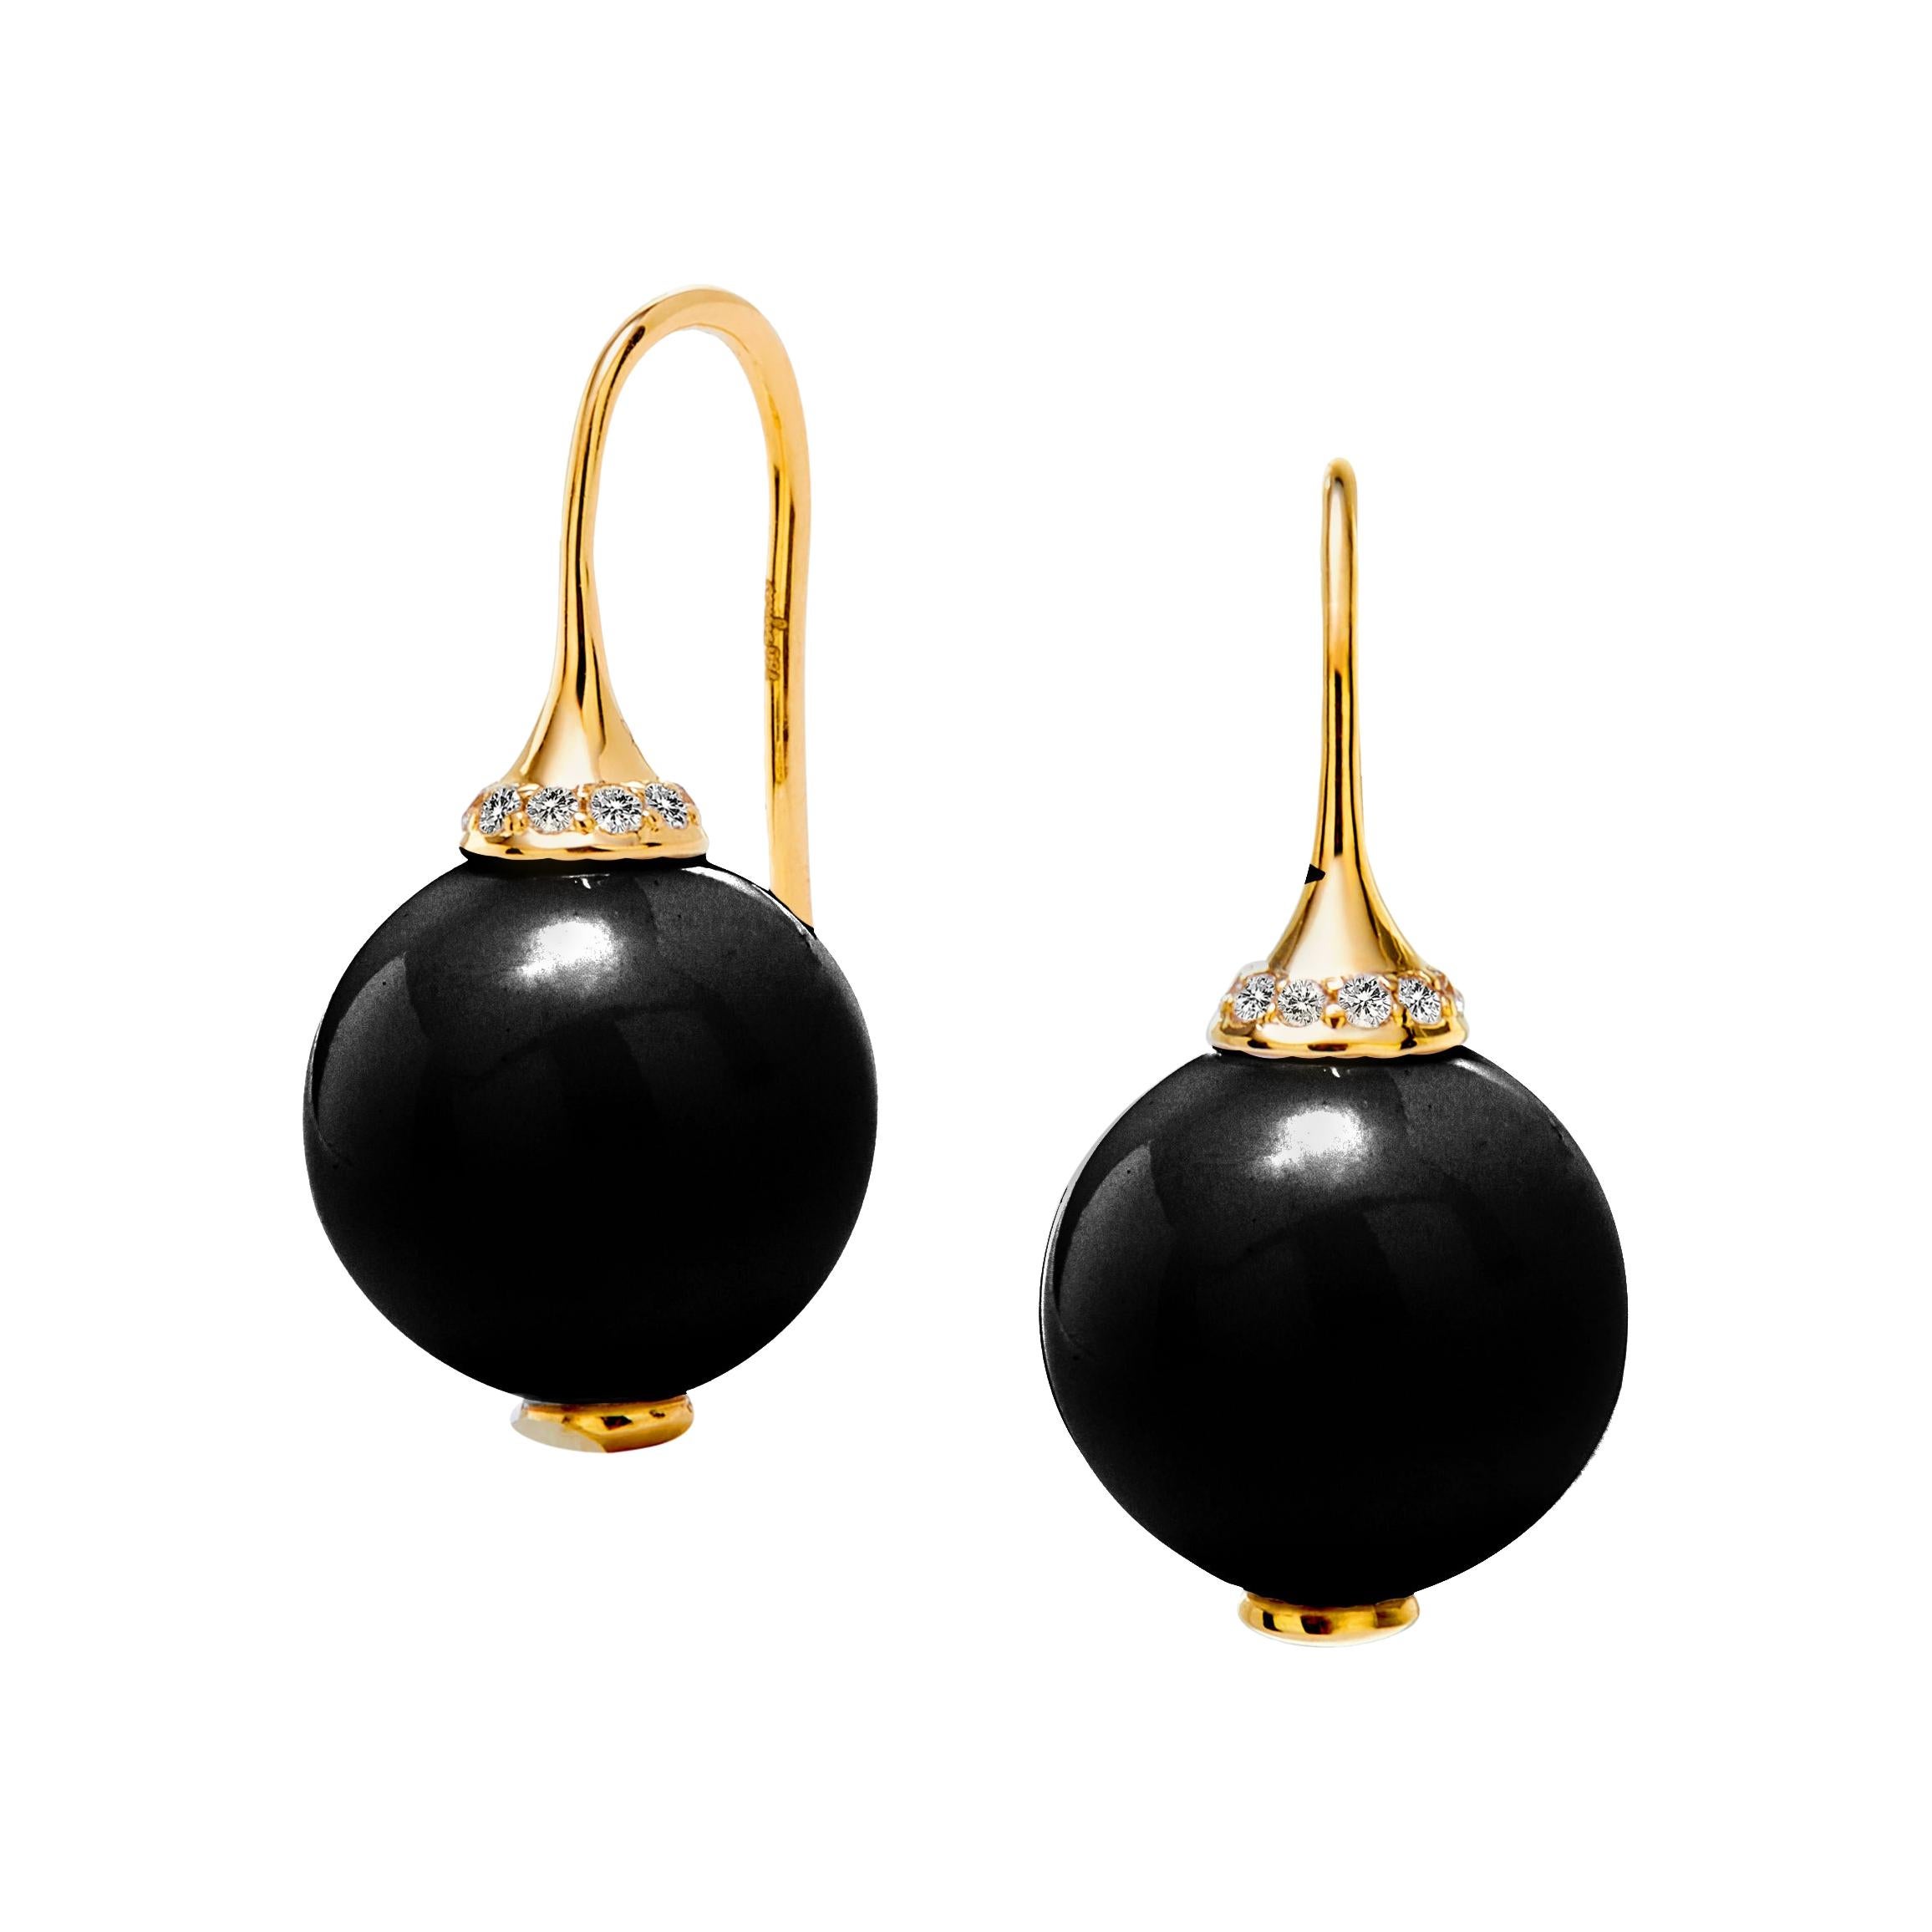 Syna Yellow Gold Black Onyx Earrings with Diamonds